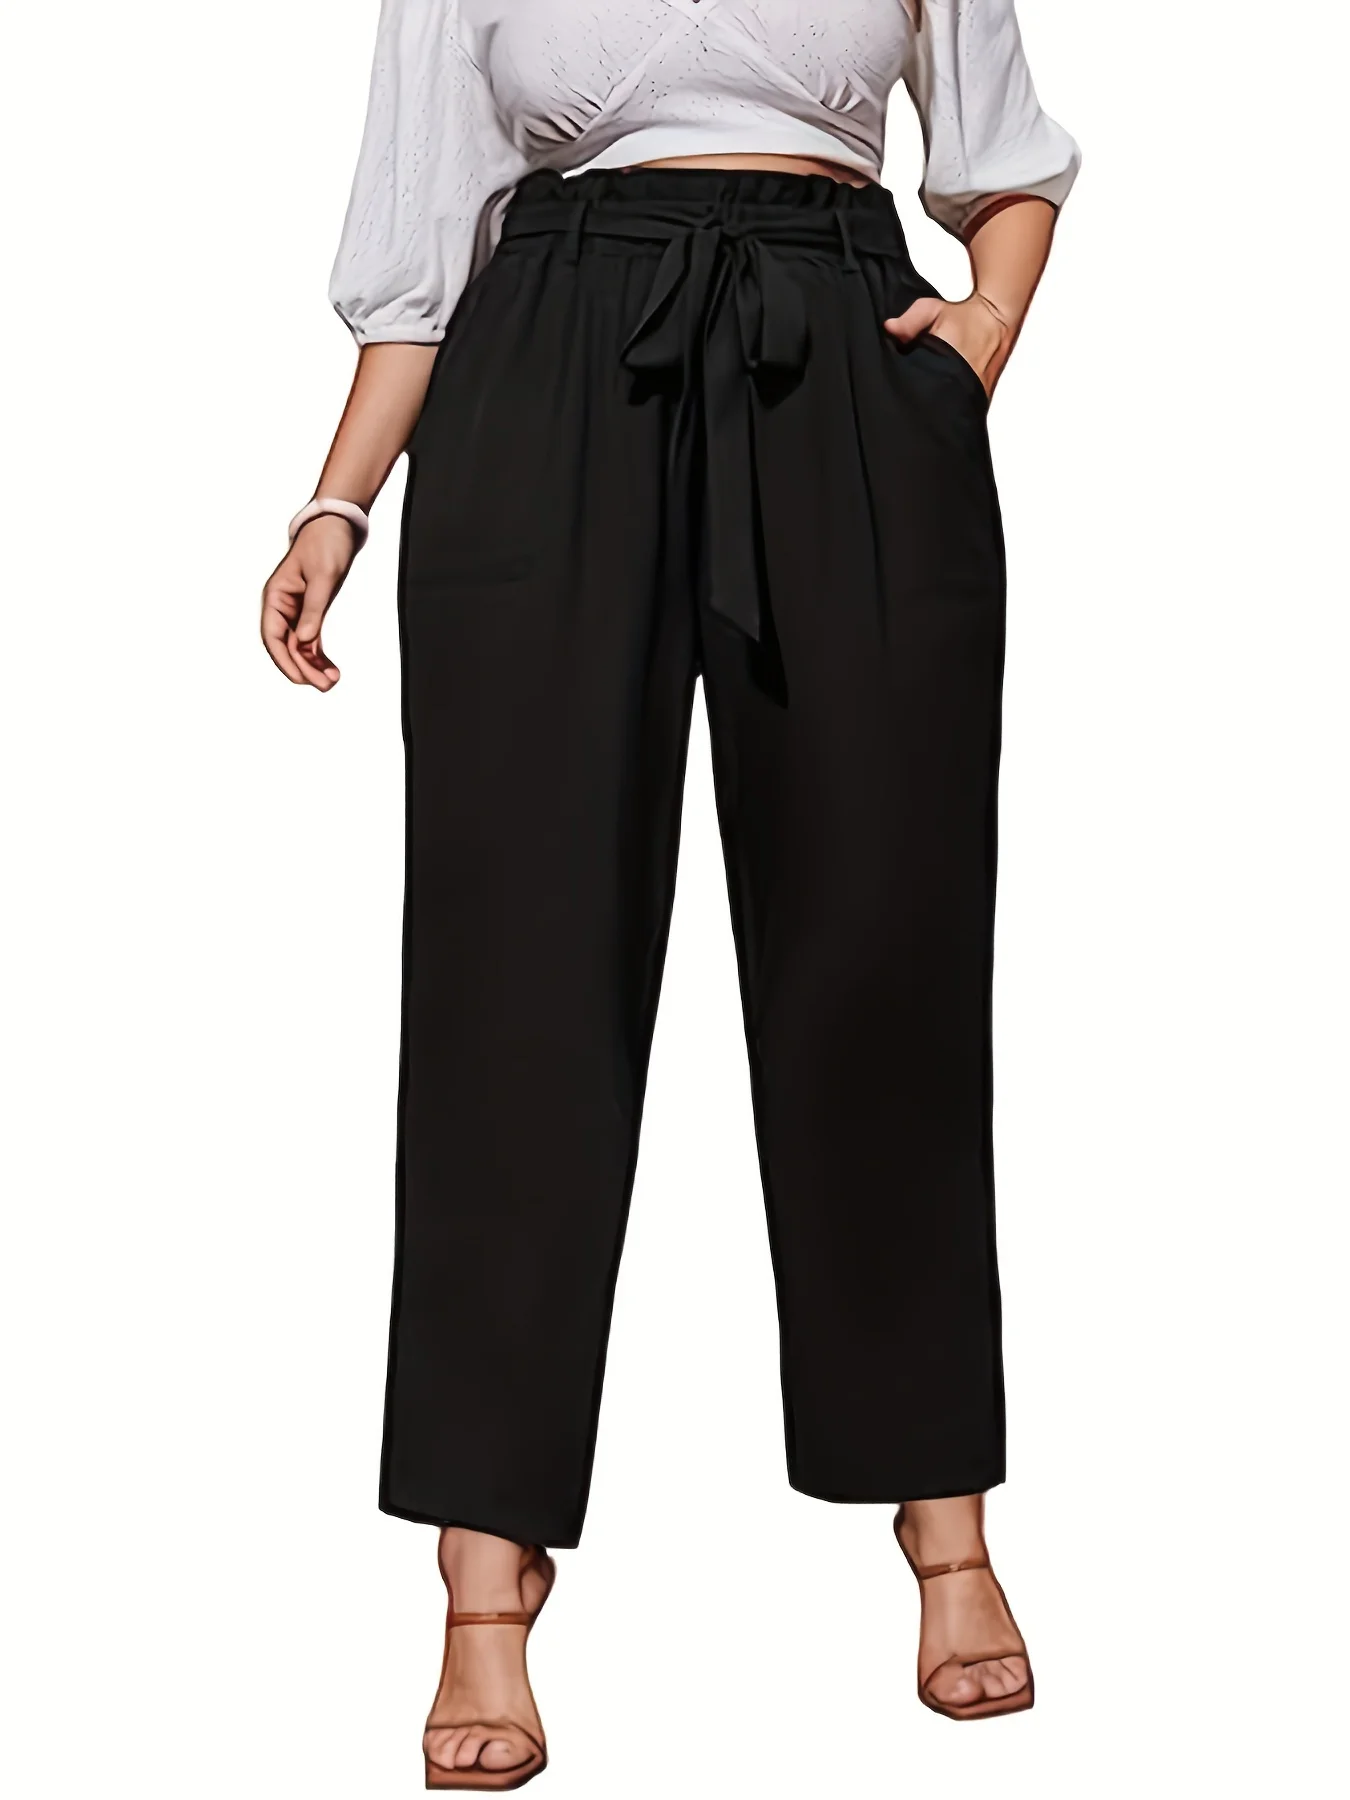 Women high-waisted style drawstring temperament design style solid color pants